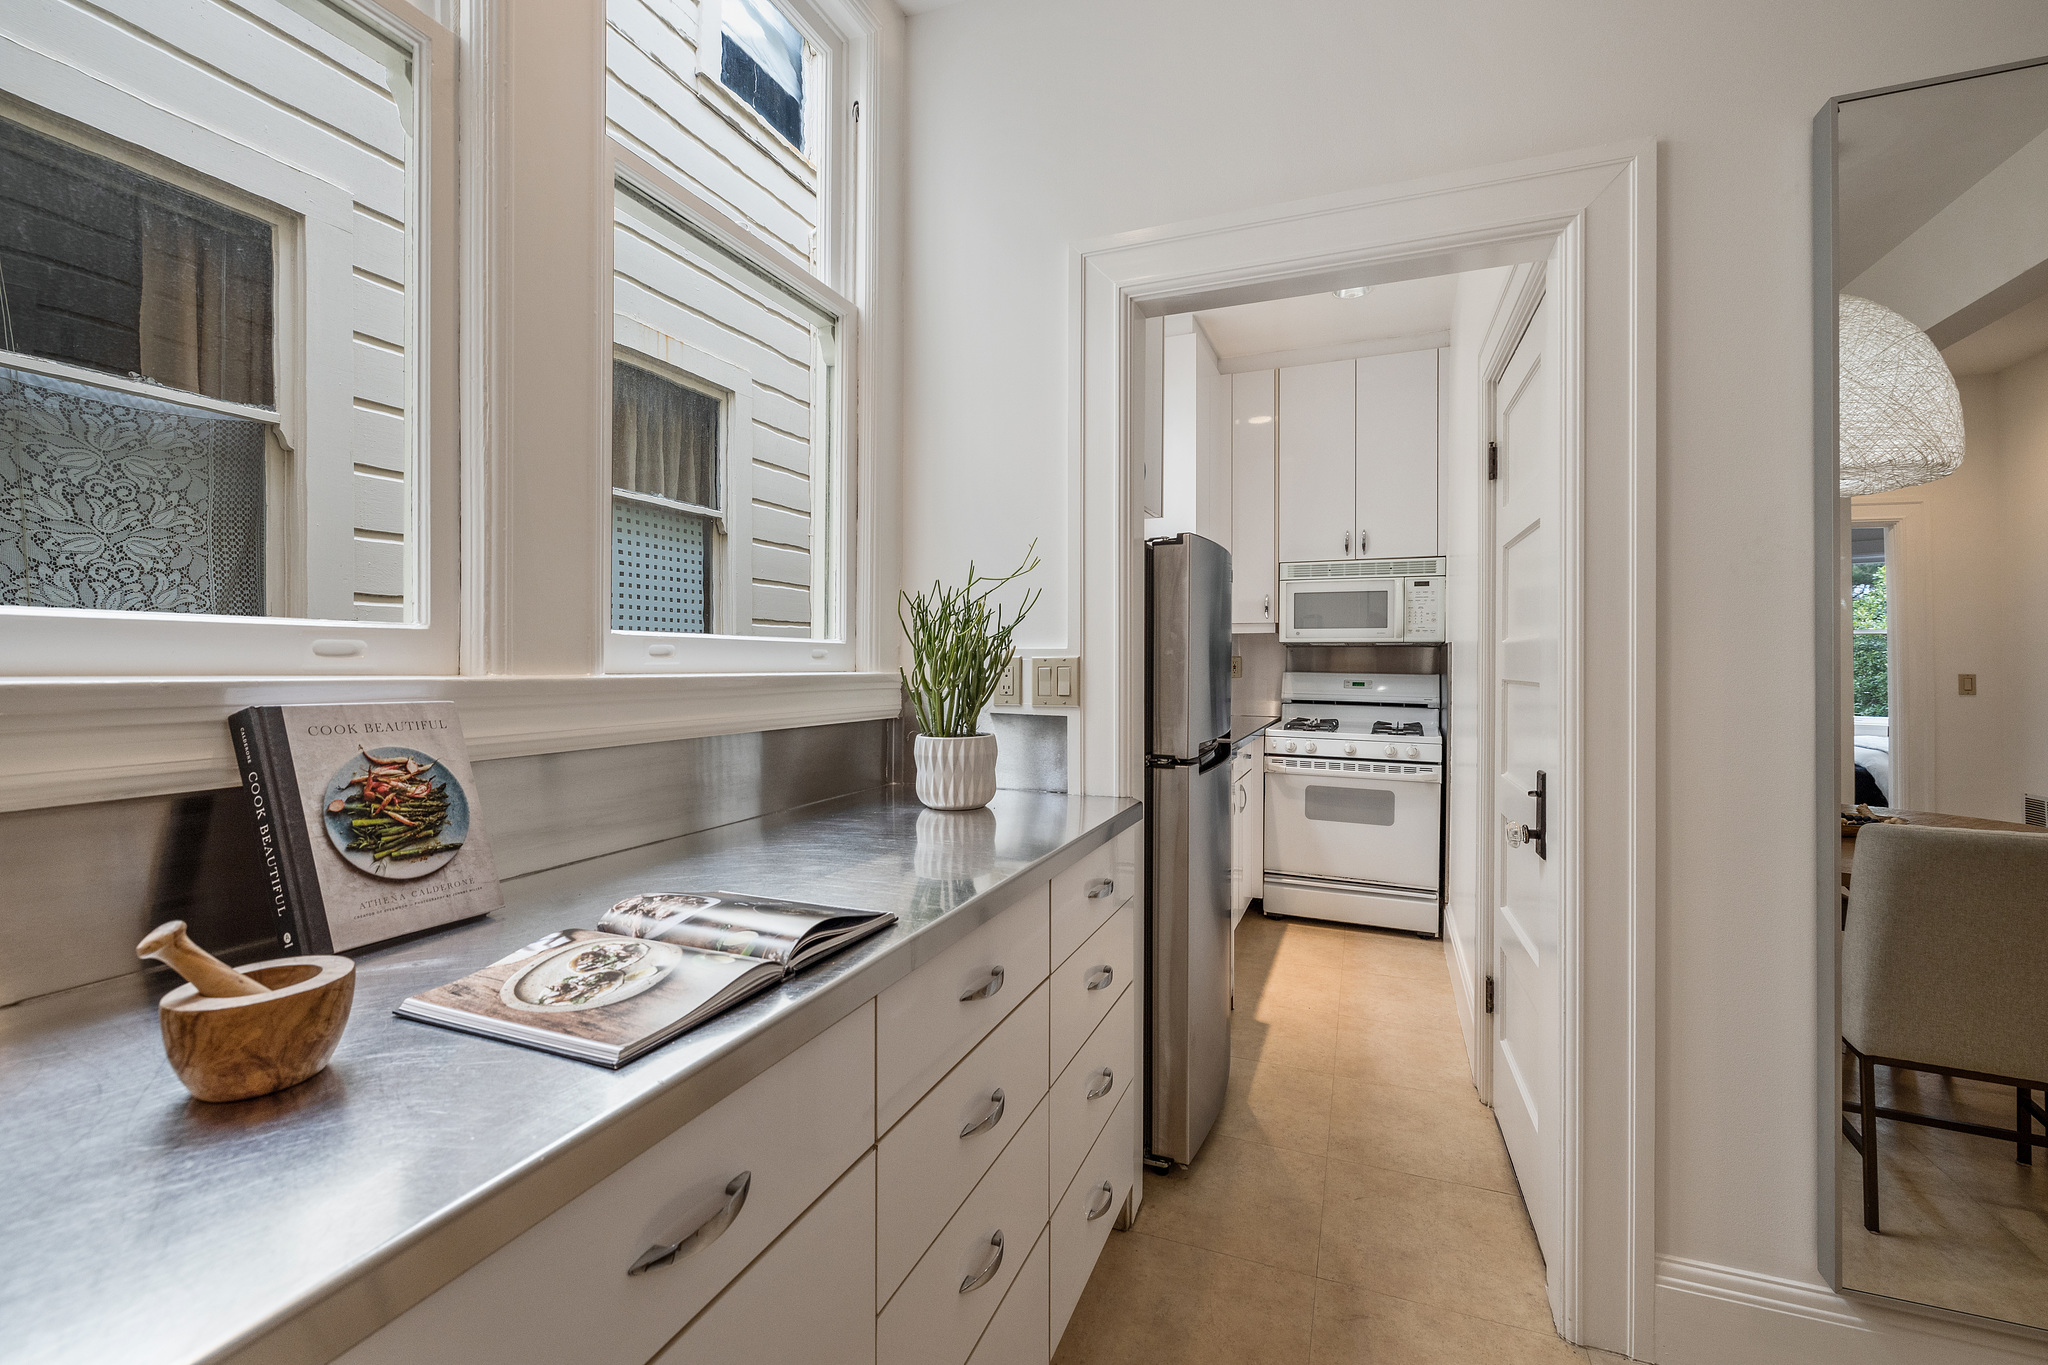 Property Photo: Kitchen, with white cabinets and galley style cooking area